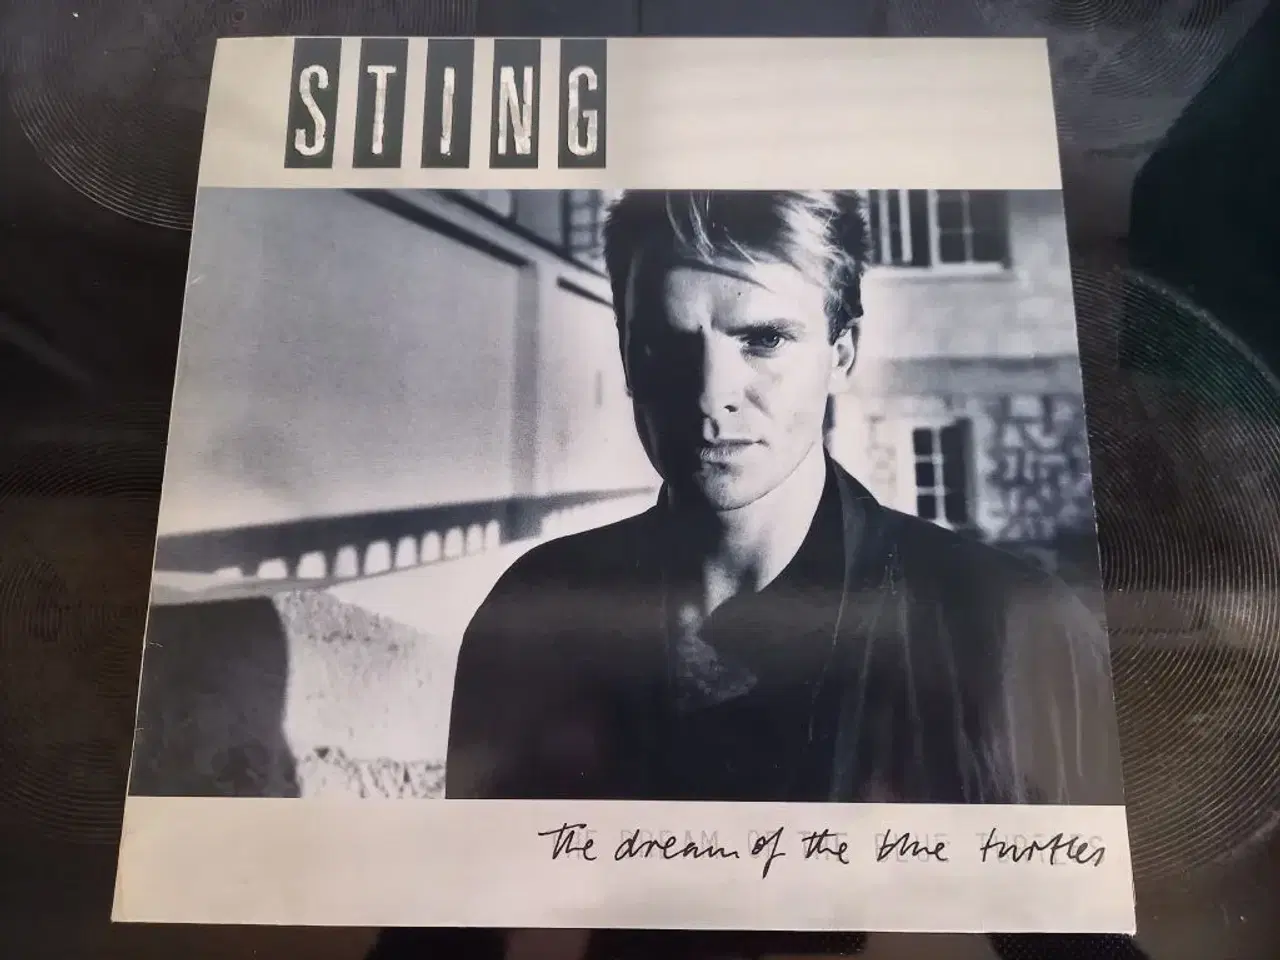 Billede 1 - Sting "The Dream of the blue turtles"